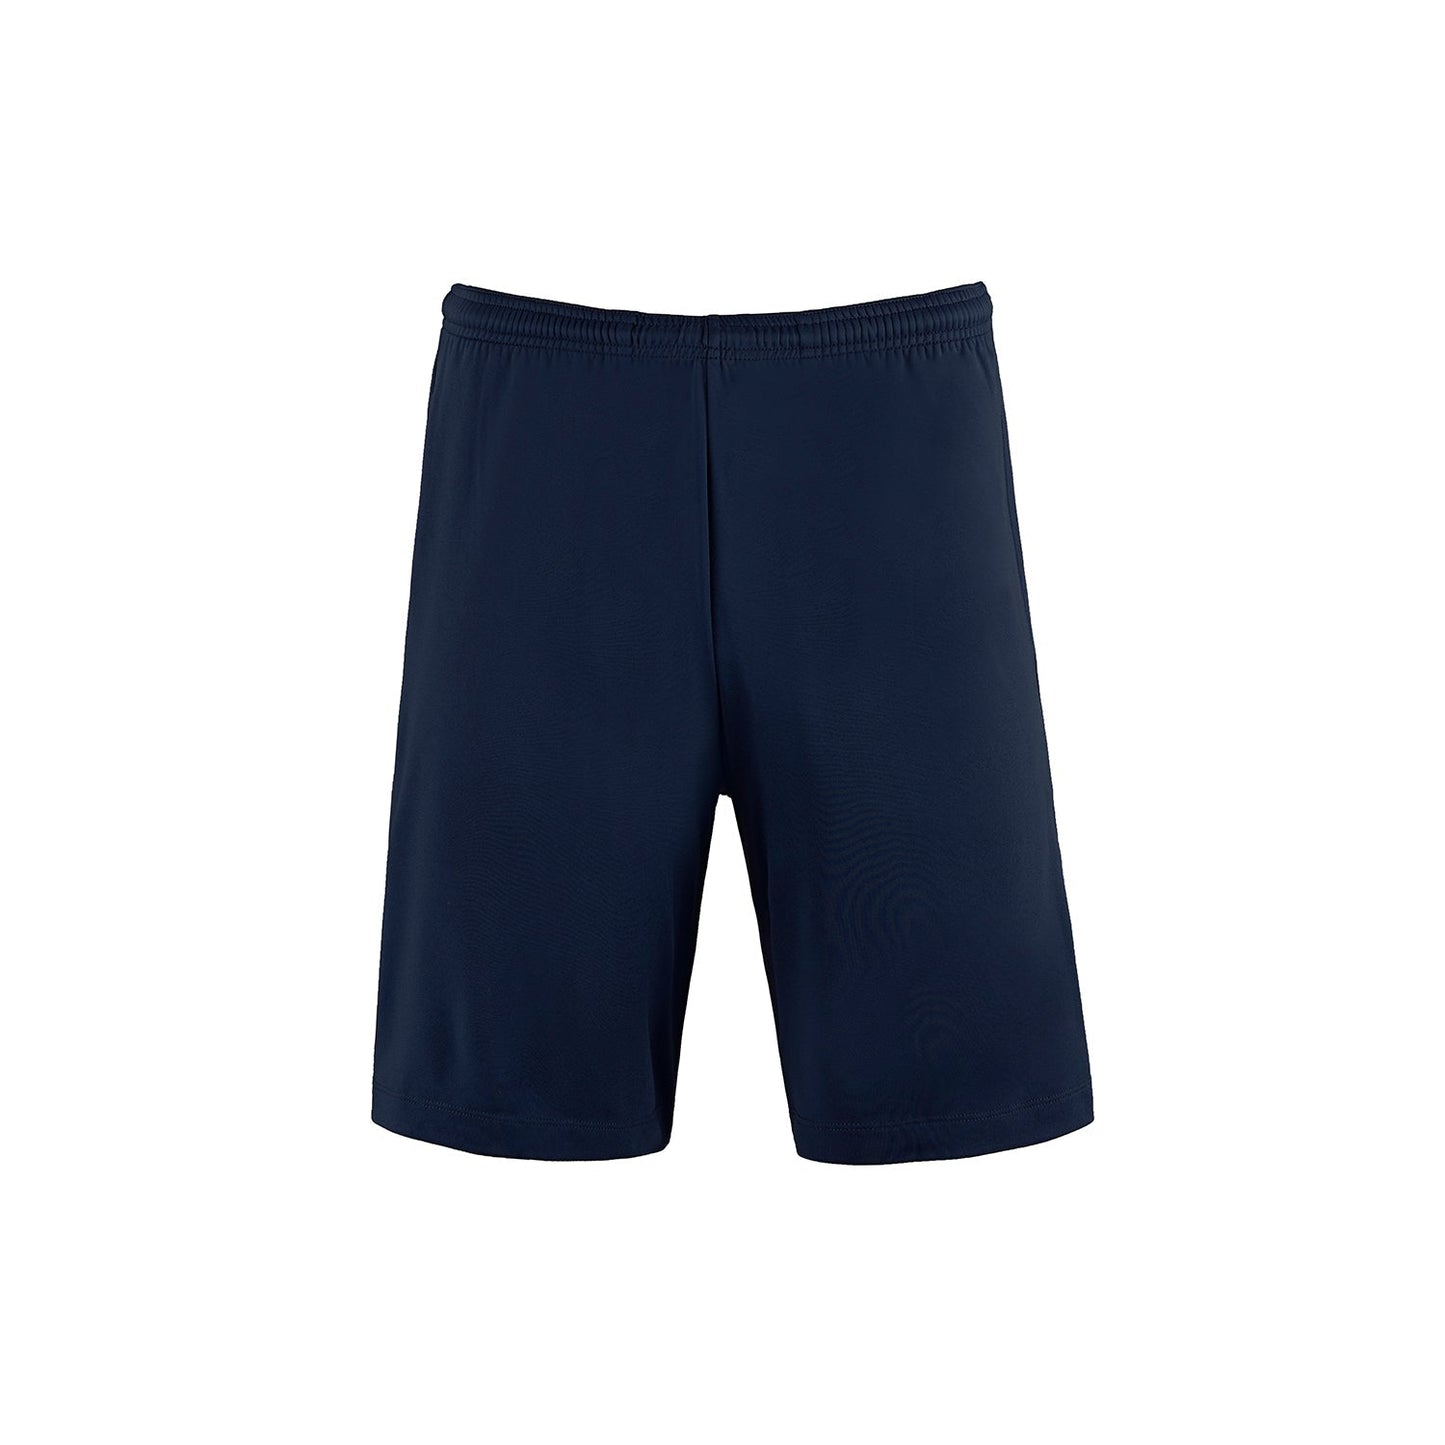 P04475 - Wave Athletic Short with Pockets Navy / XS